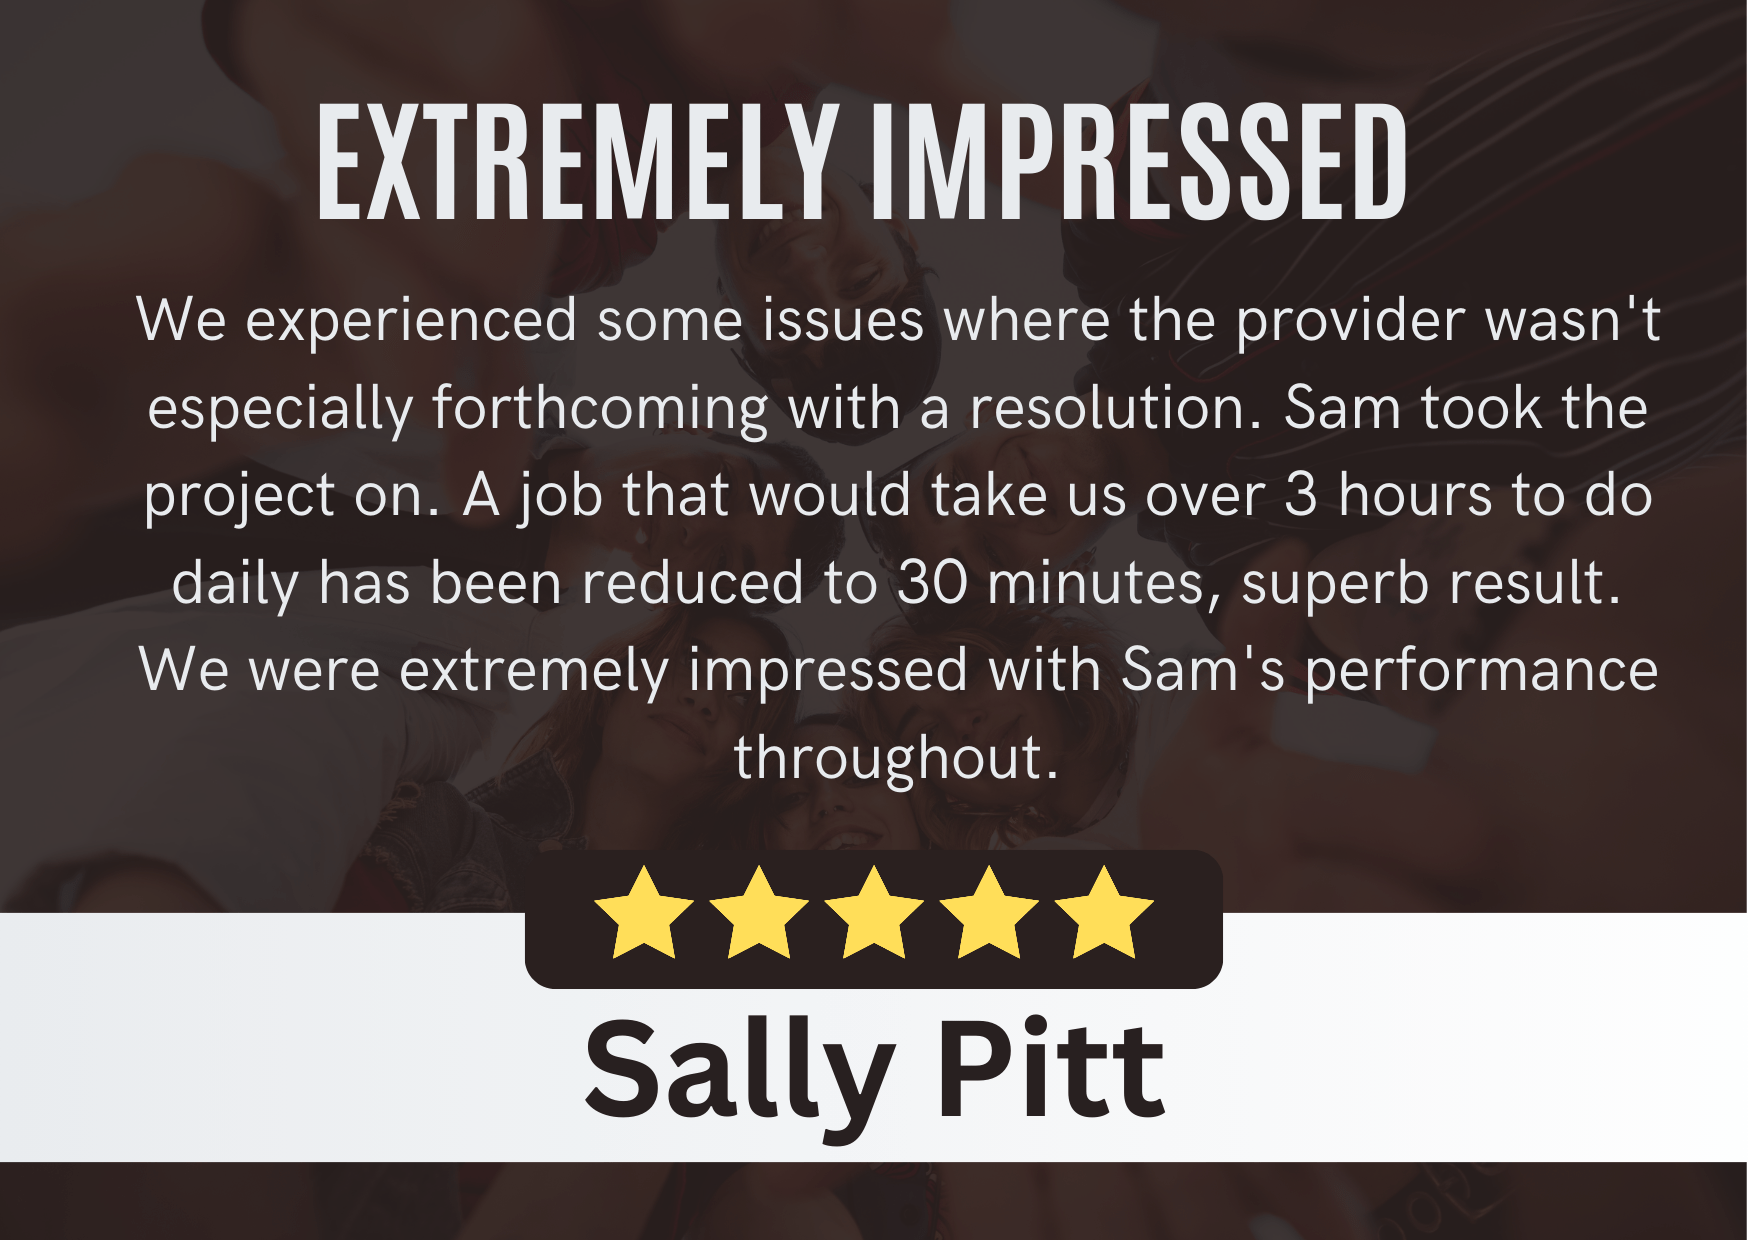 Sally Pitt - Edworthy Media Review | PPC Agency & SEO Services Exeter. Review Content: We experienced some issues where the provider wasn't especially forthcoming with a resolution. Sam took the project on. A job that would take us over 3 hours to do do daily has been reduced to 30 minutes, superb result. We were extremely impressed with Sam's performance throughout.